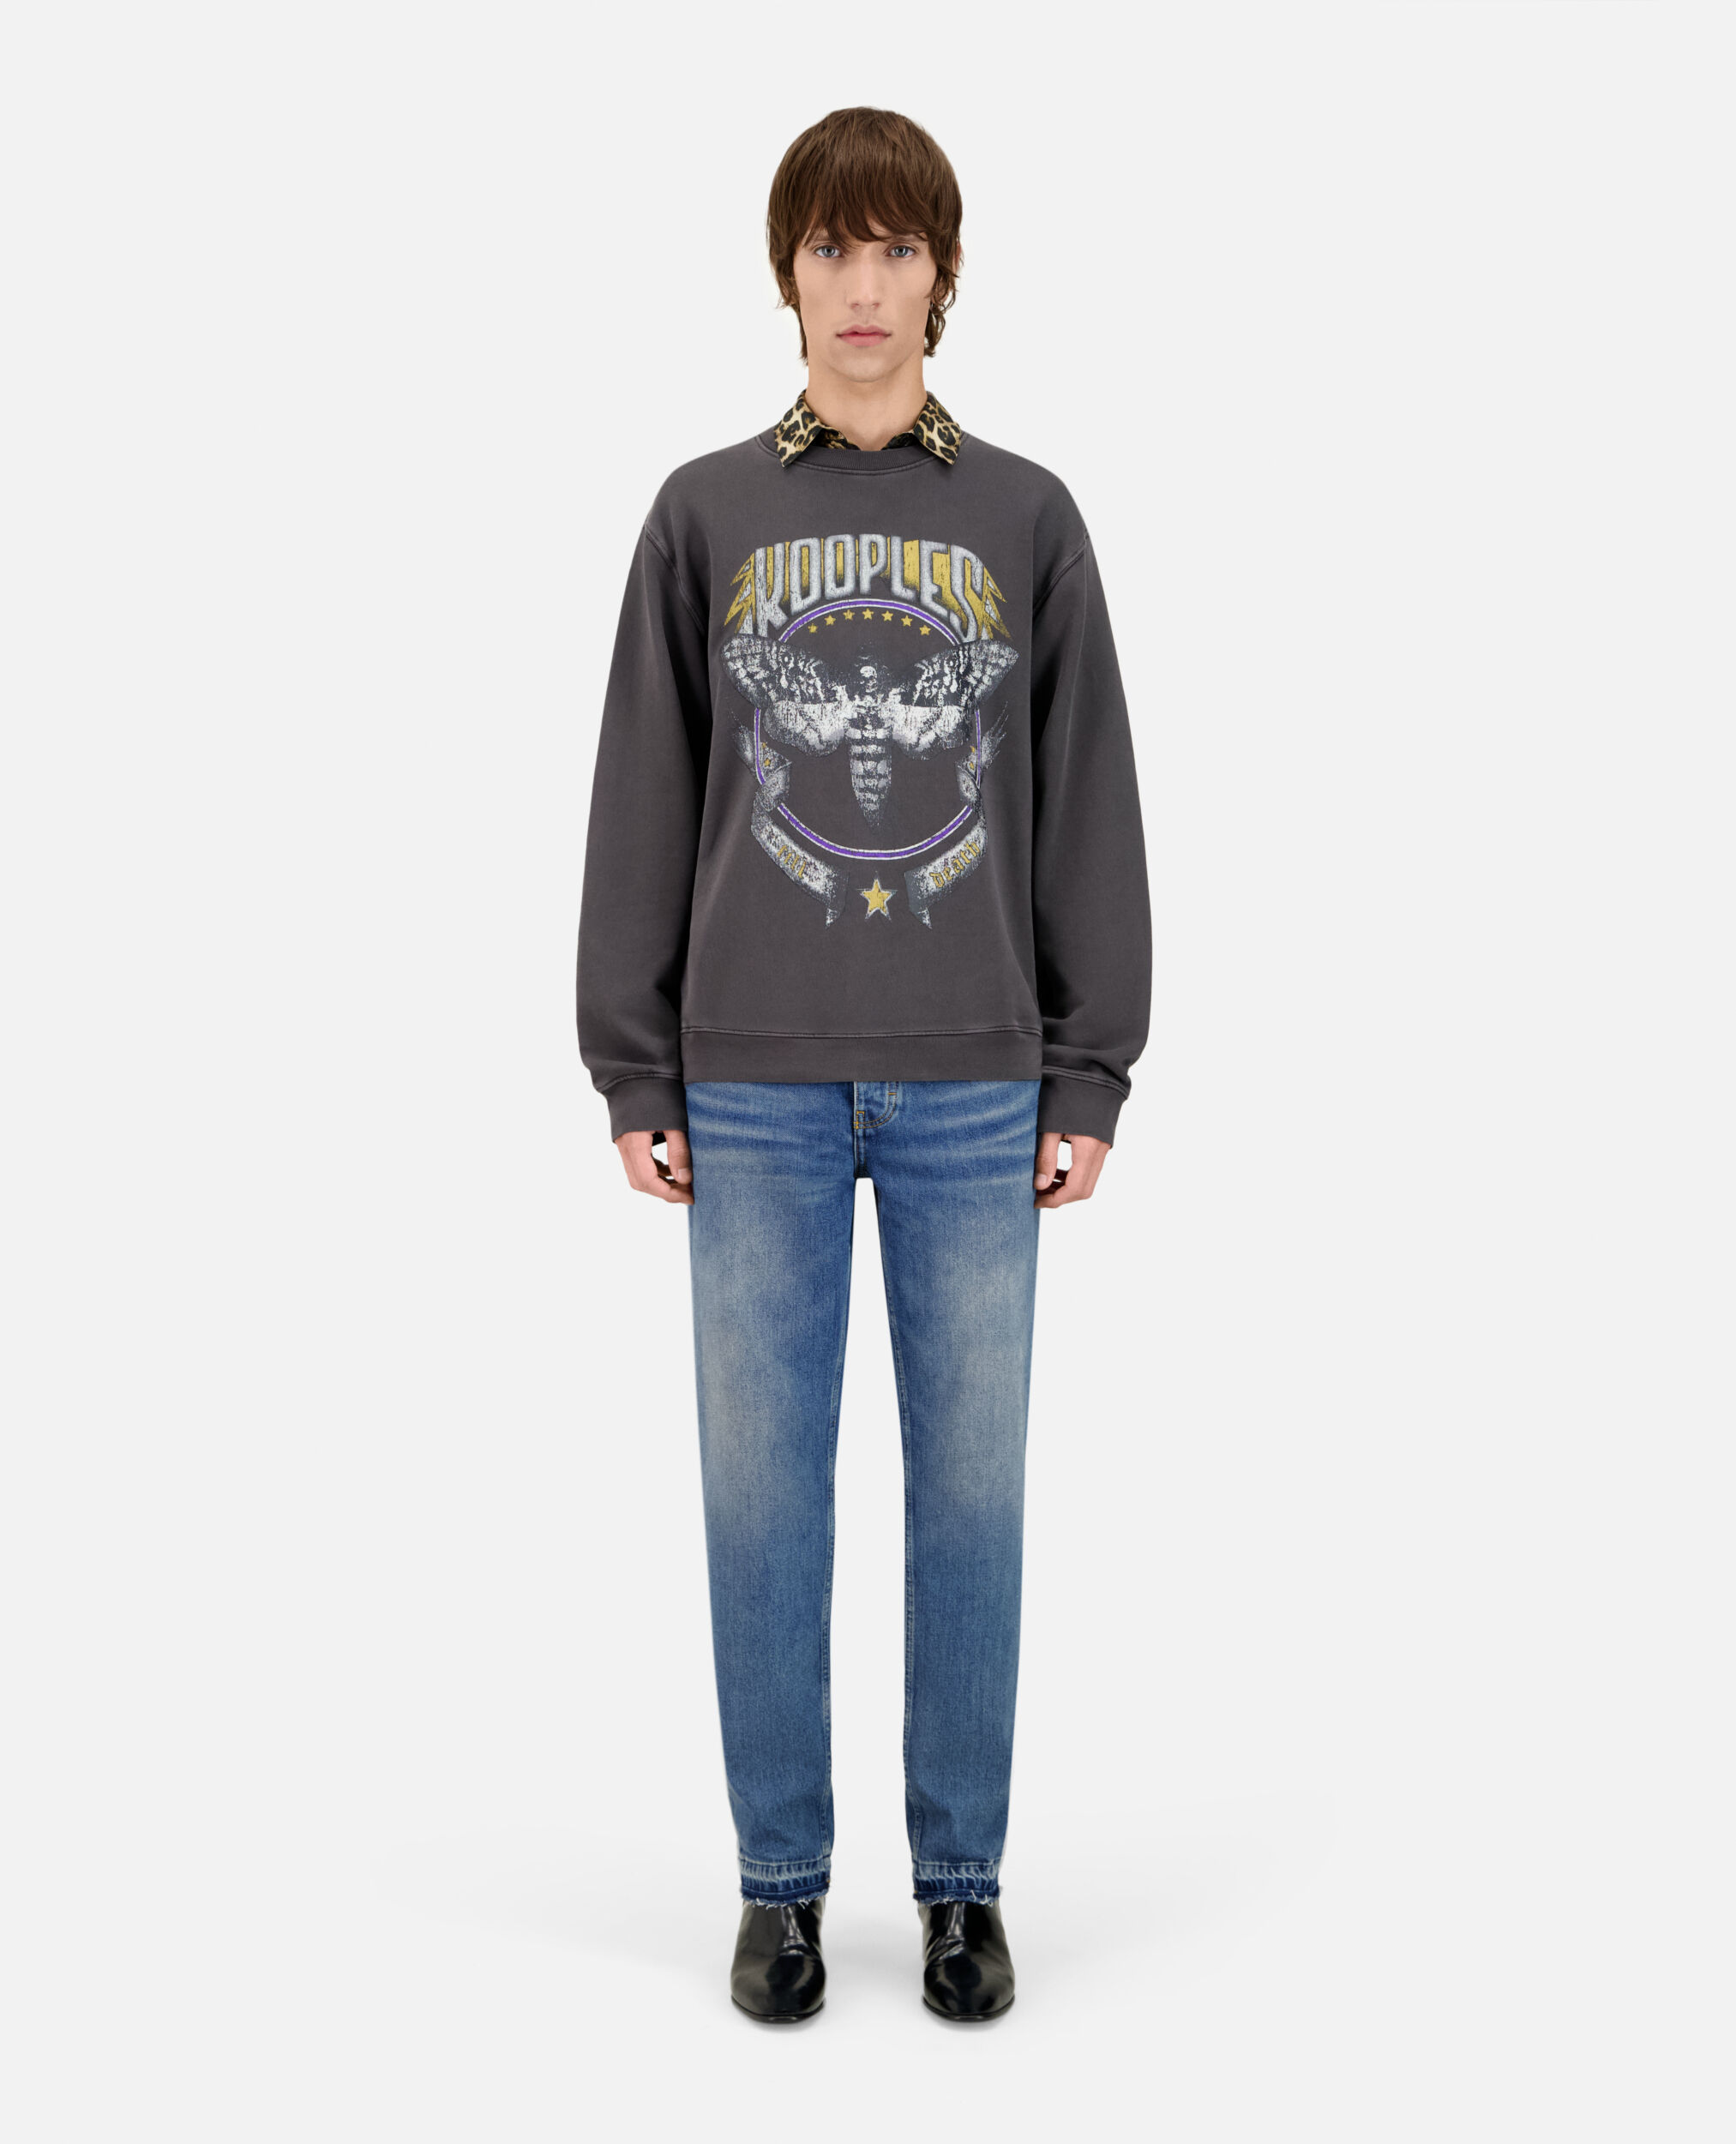 Sudadera gris carbono Skull butterfly, CARBONE, hi-res image number null